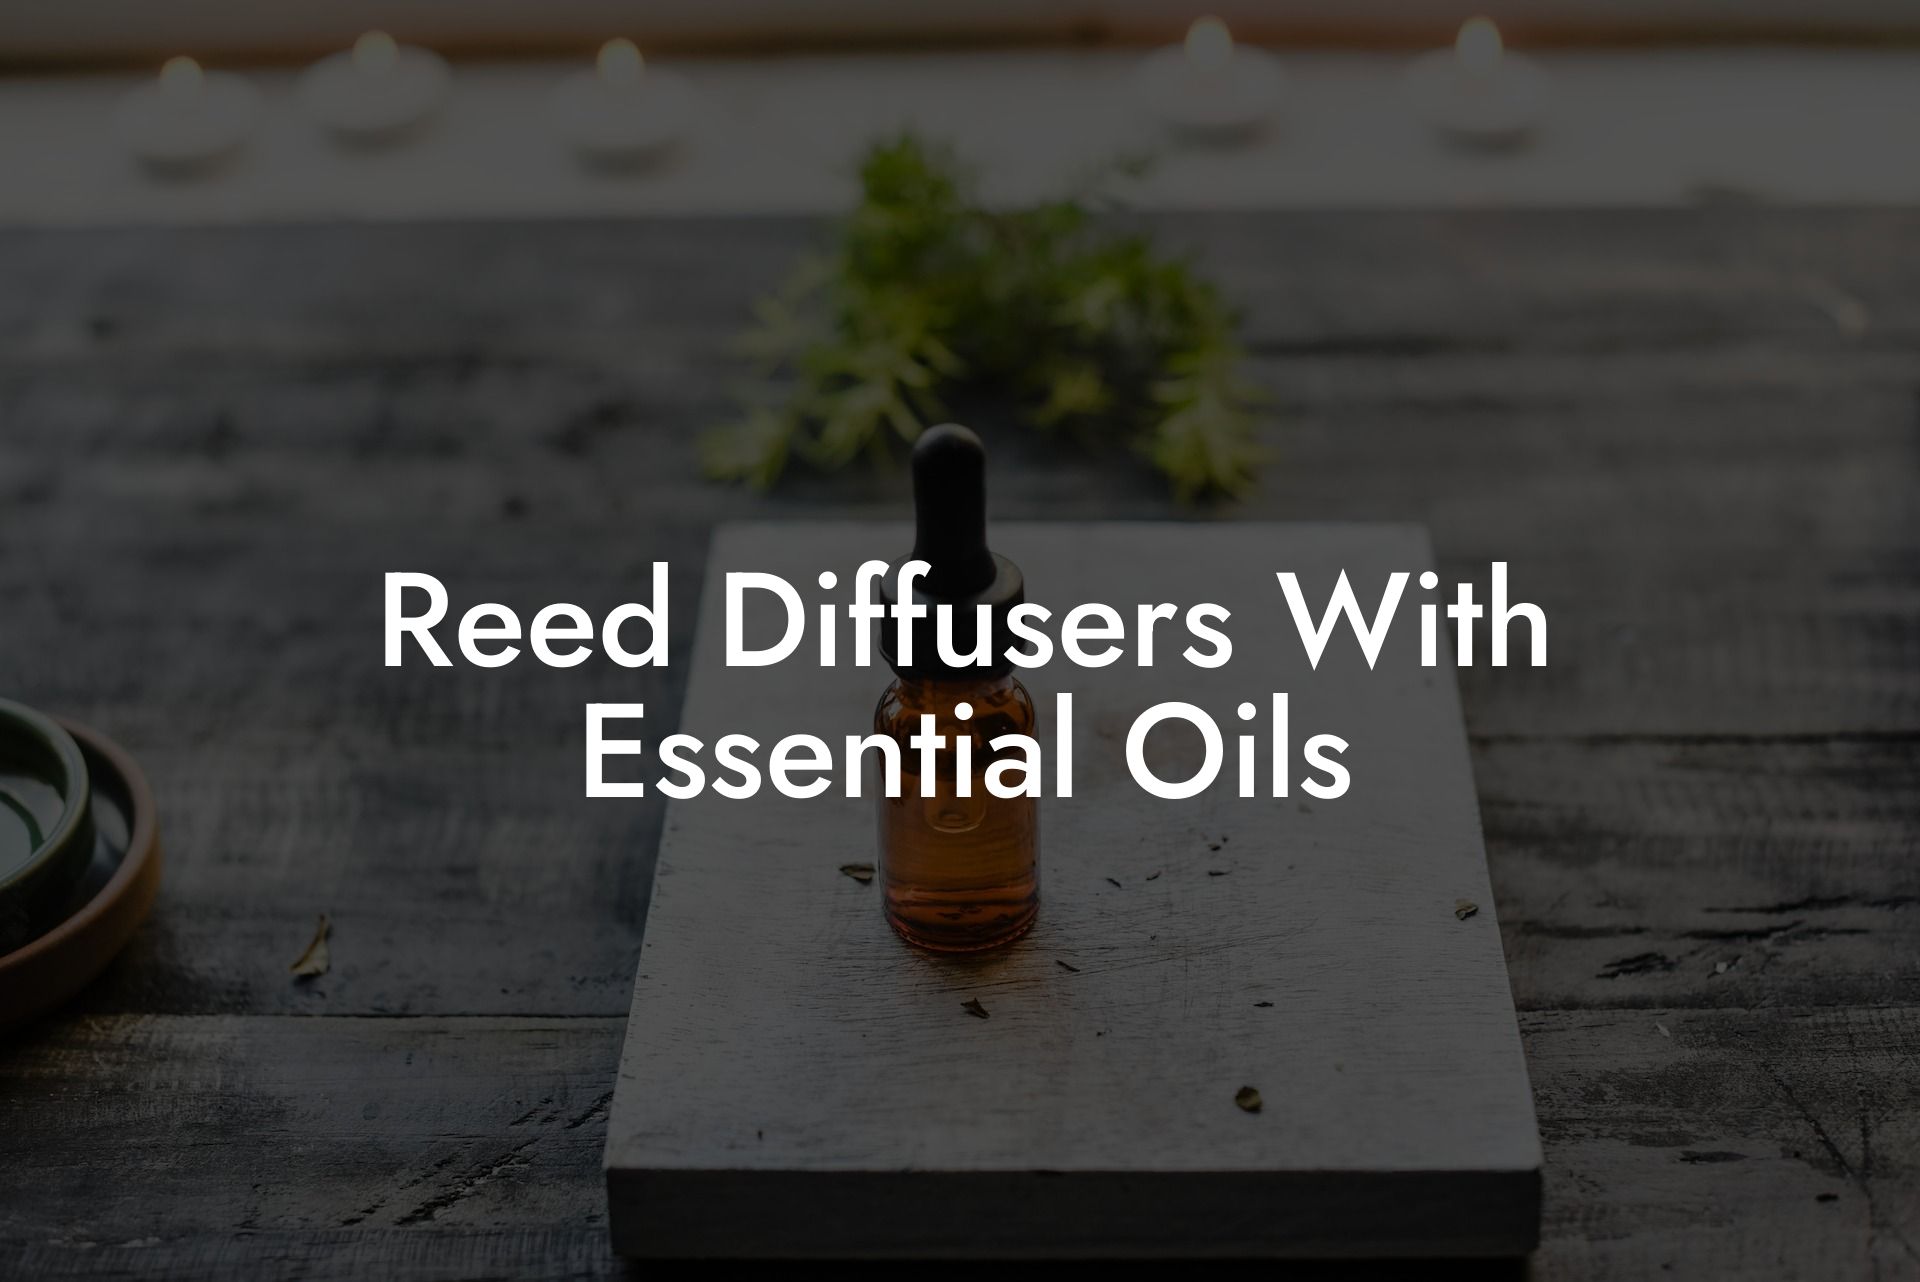 Reed Diffusers With Essential Oils